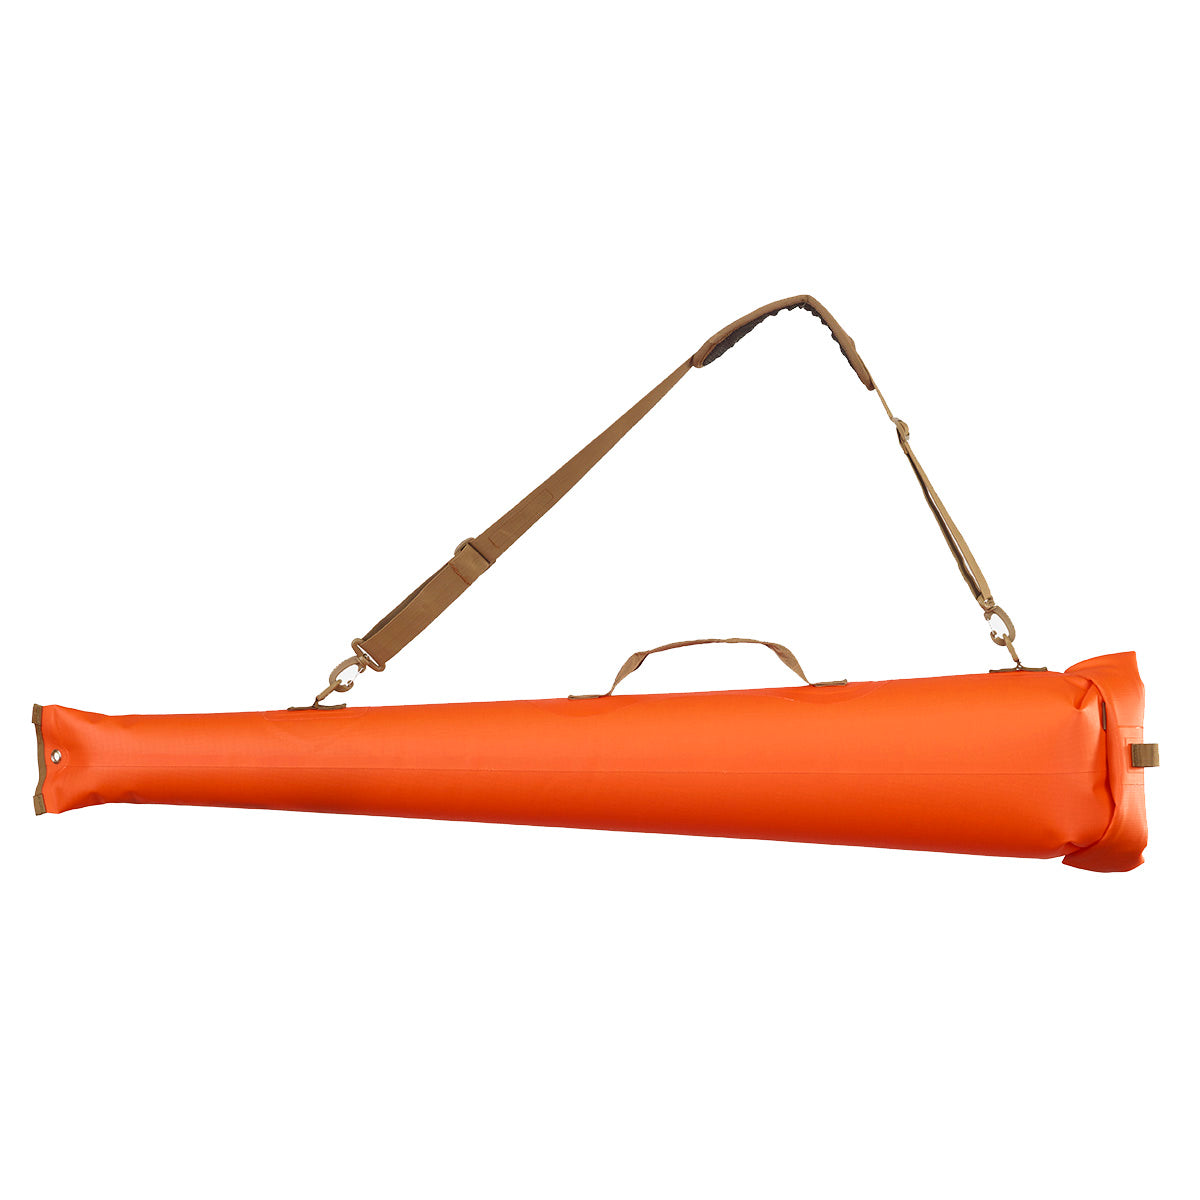 A large orange Wetland Shotgun Bag by Watershed with a handle attached to it.